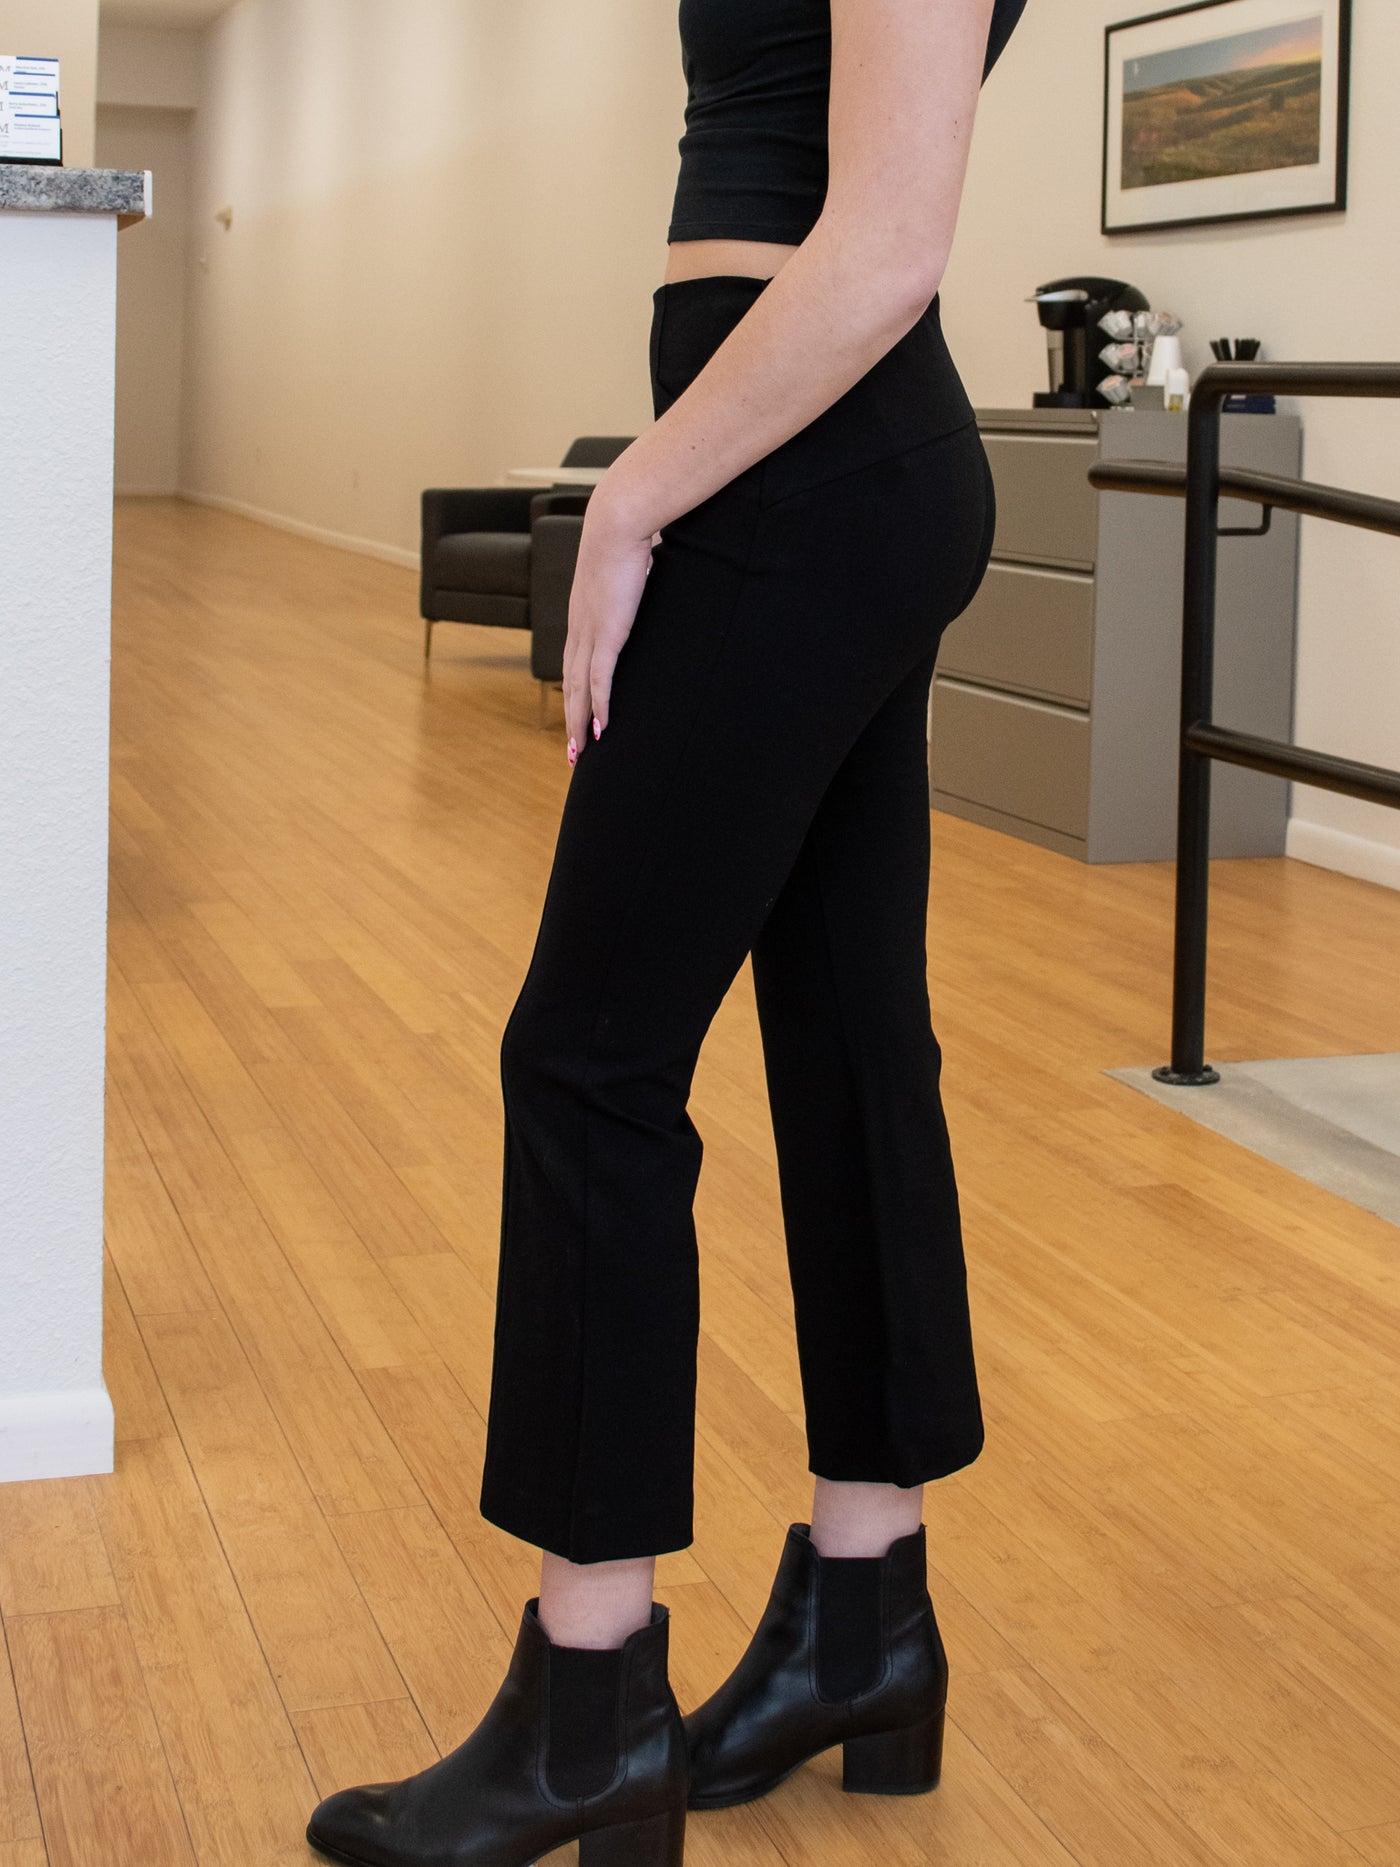 A model wearing a pair of black kick flare pants with welt pockets. She has it on with black boots and black top.